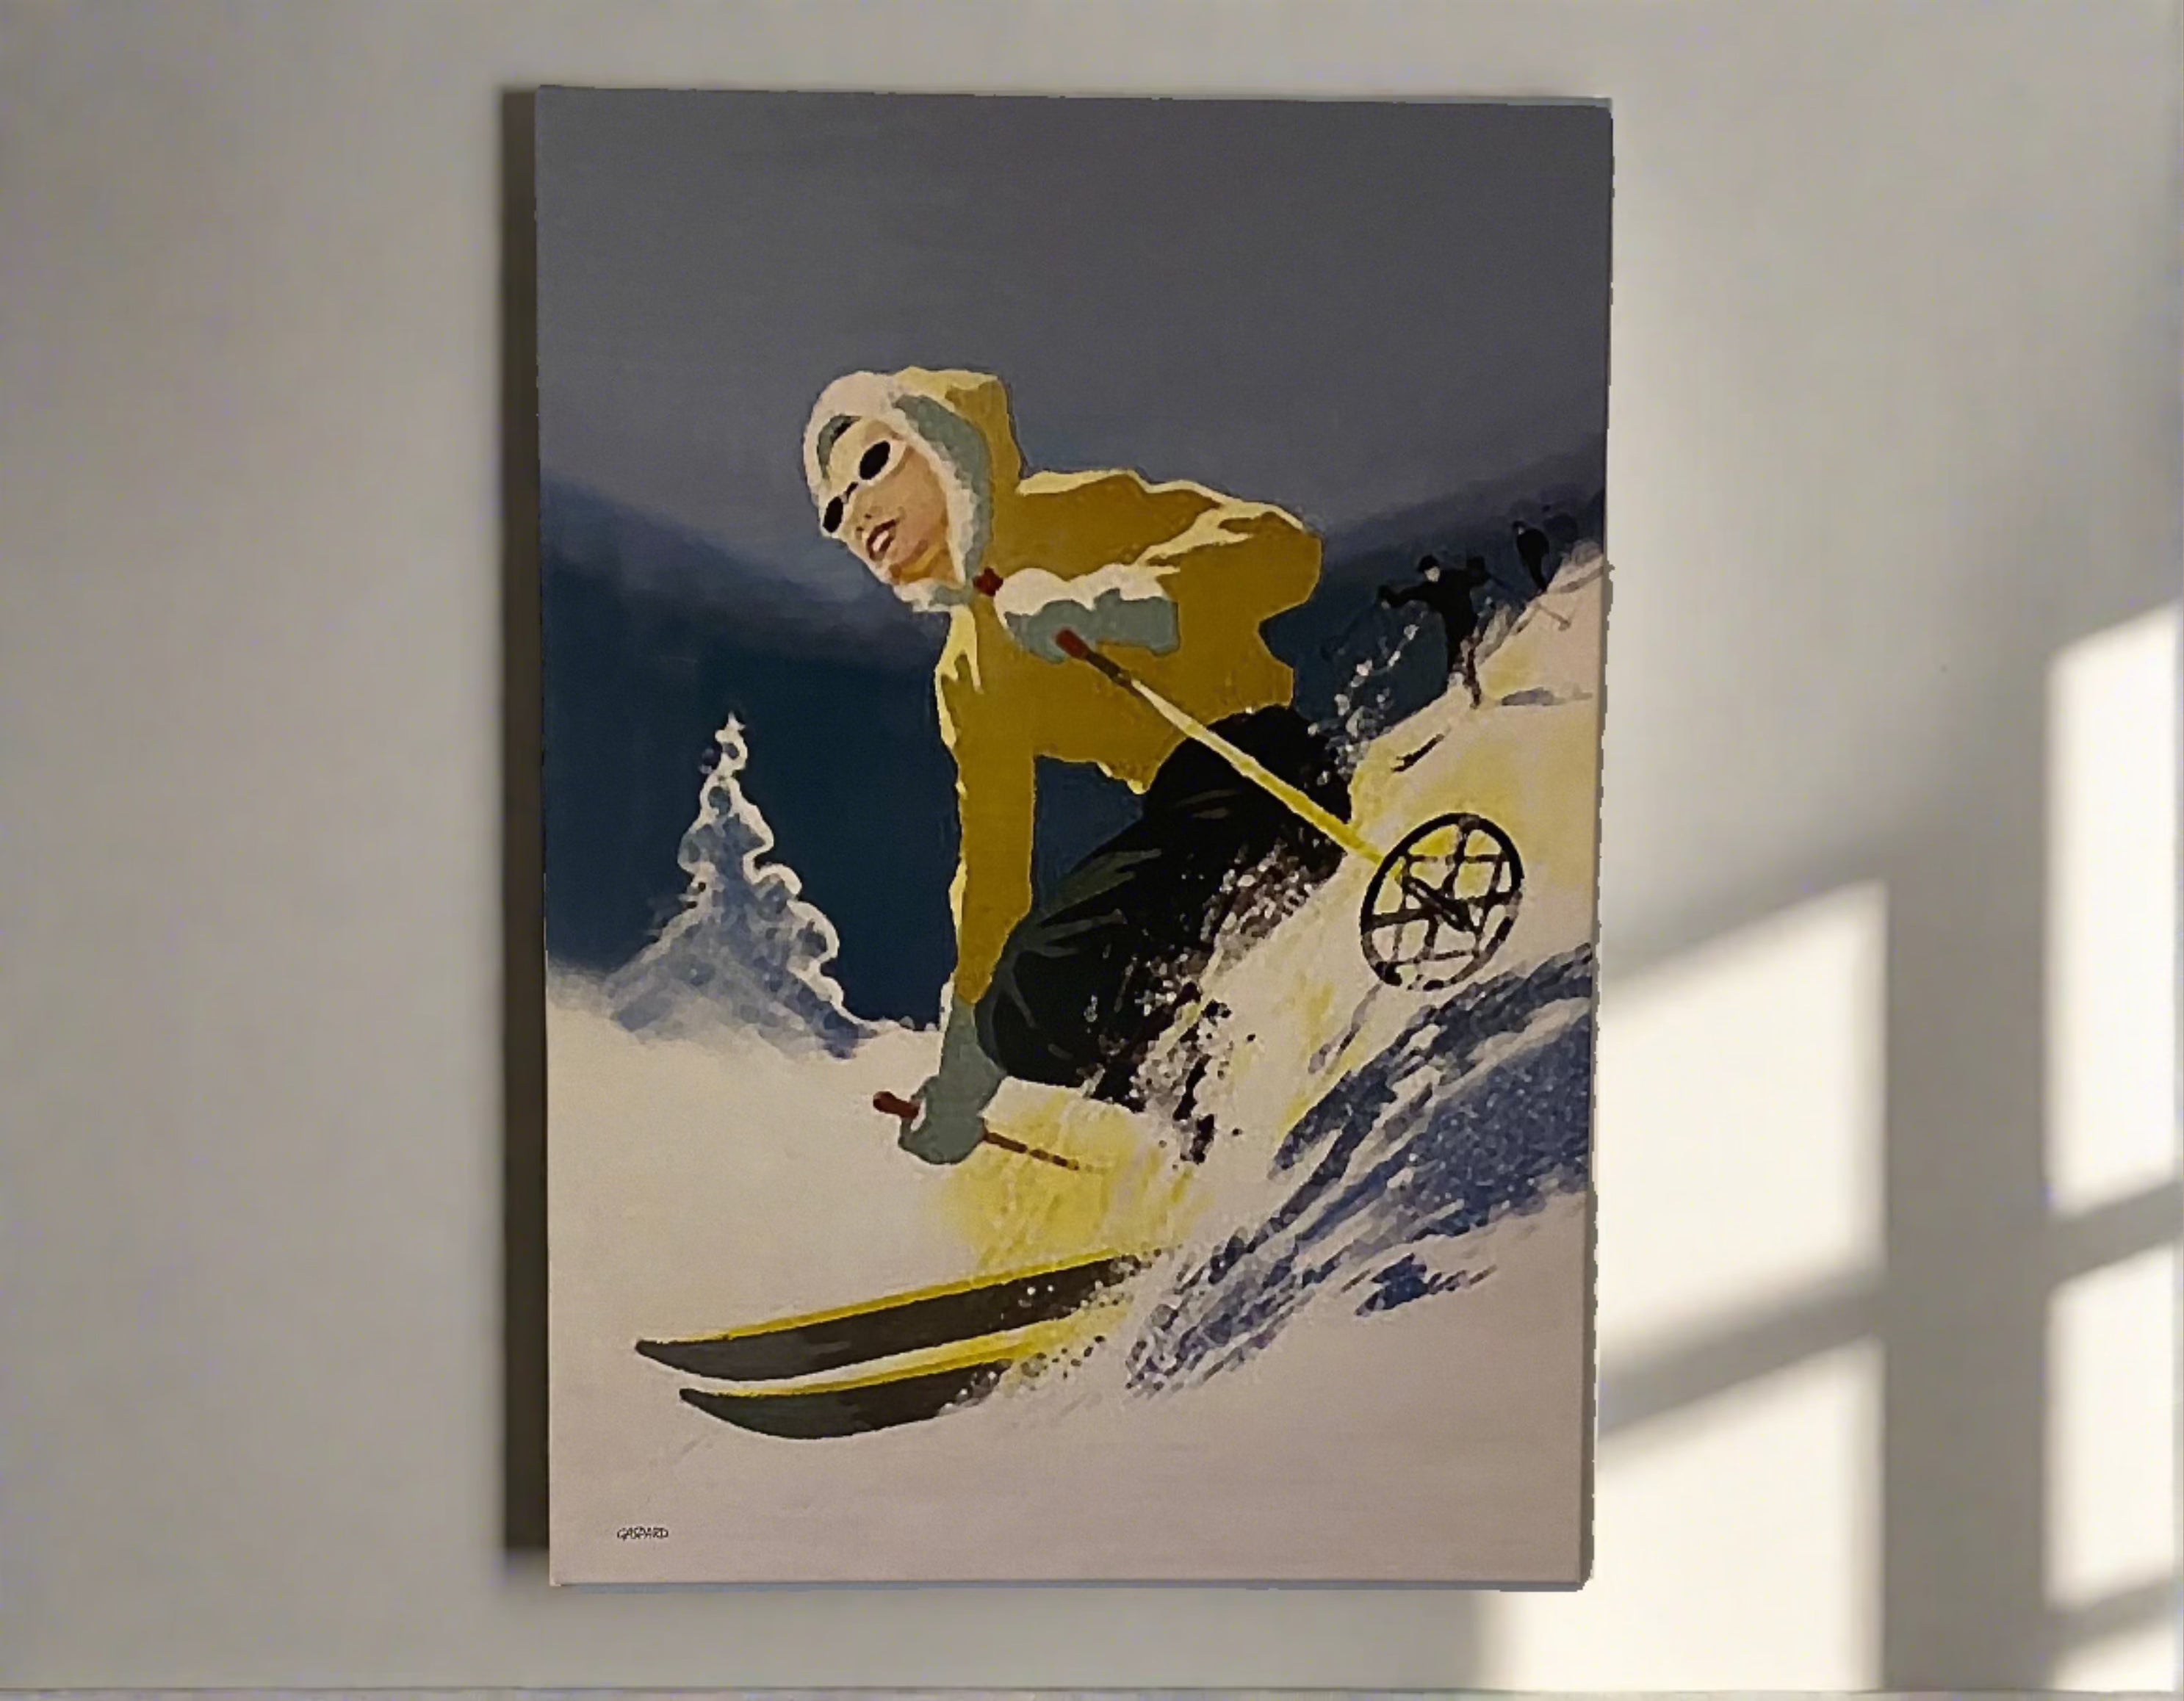 Canvas depicting a woman in a yellow jacket with a white fur at the edge of the hood and blue pants skiing downhill, leaning to the right into the hill with a tree and the shadow of the mountains in the background below a blue sky.  Hanging on a white wall